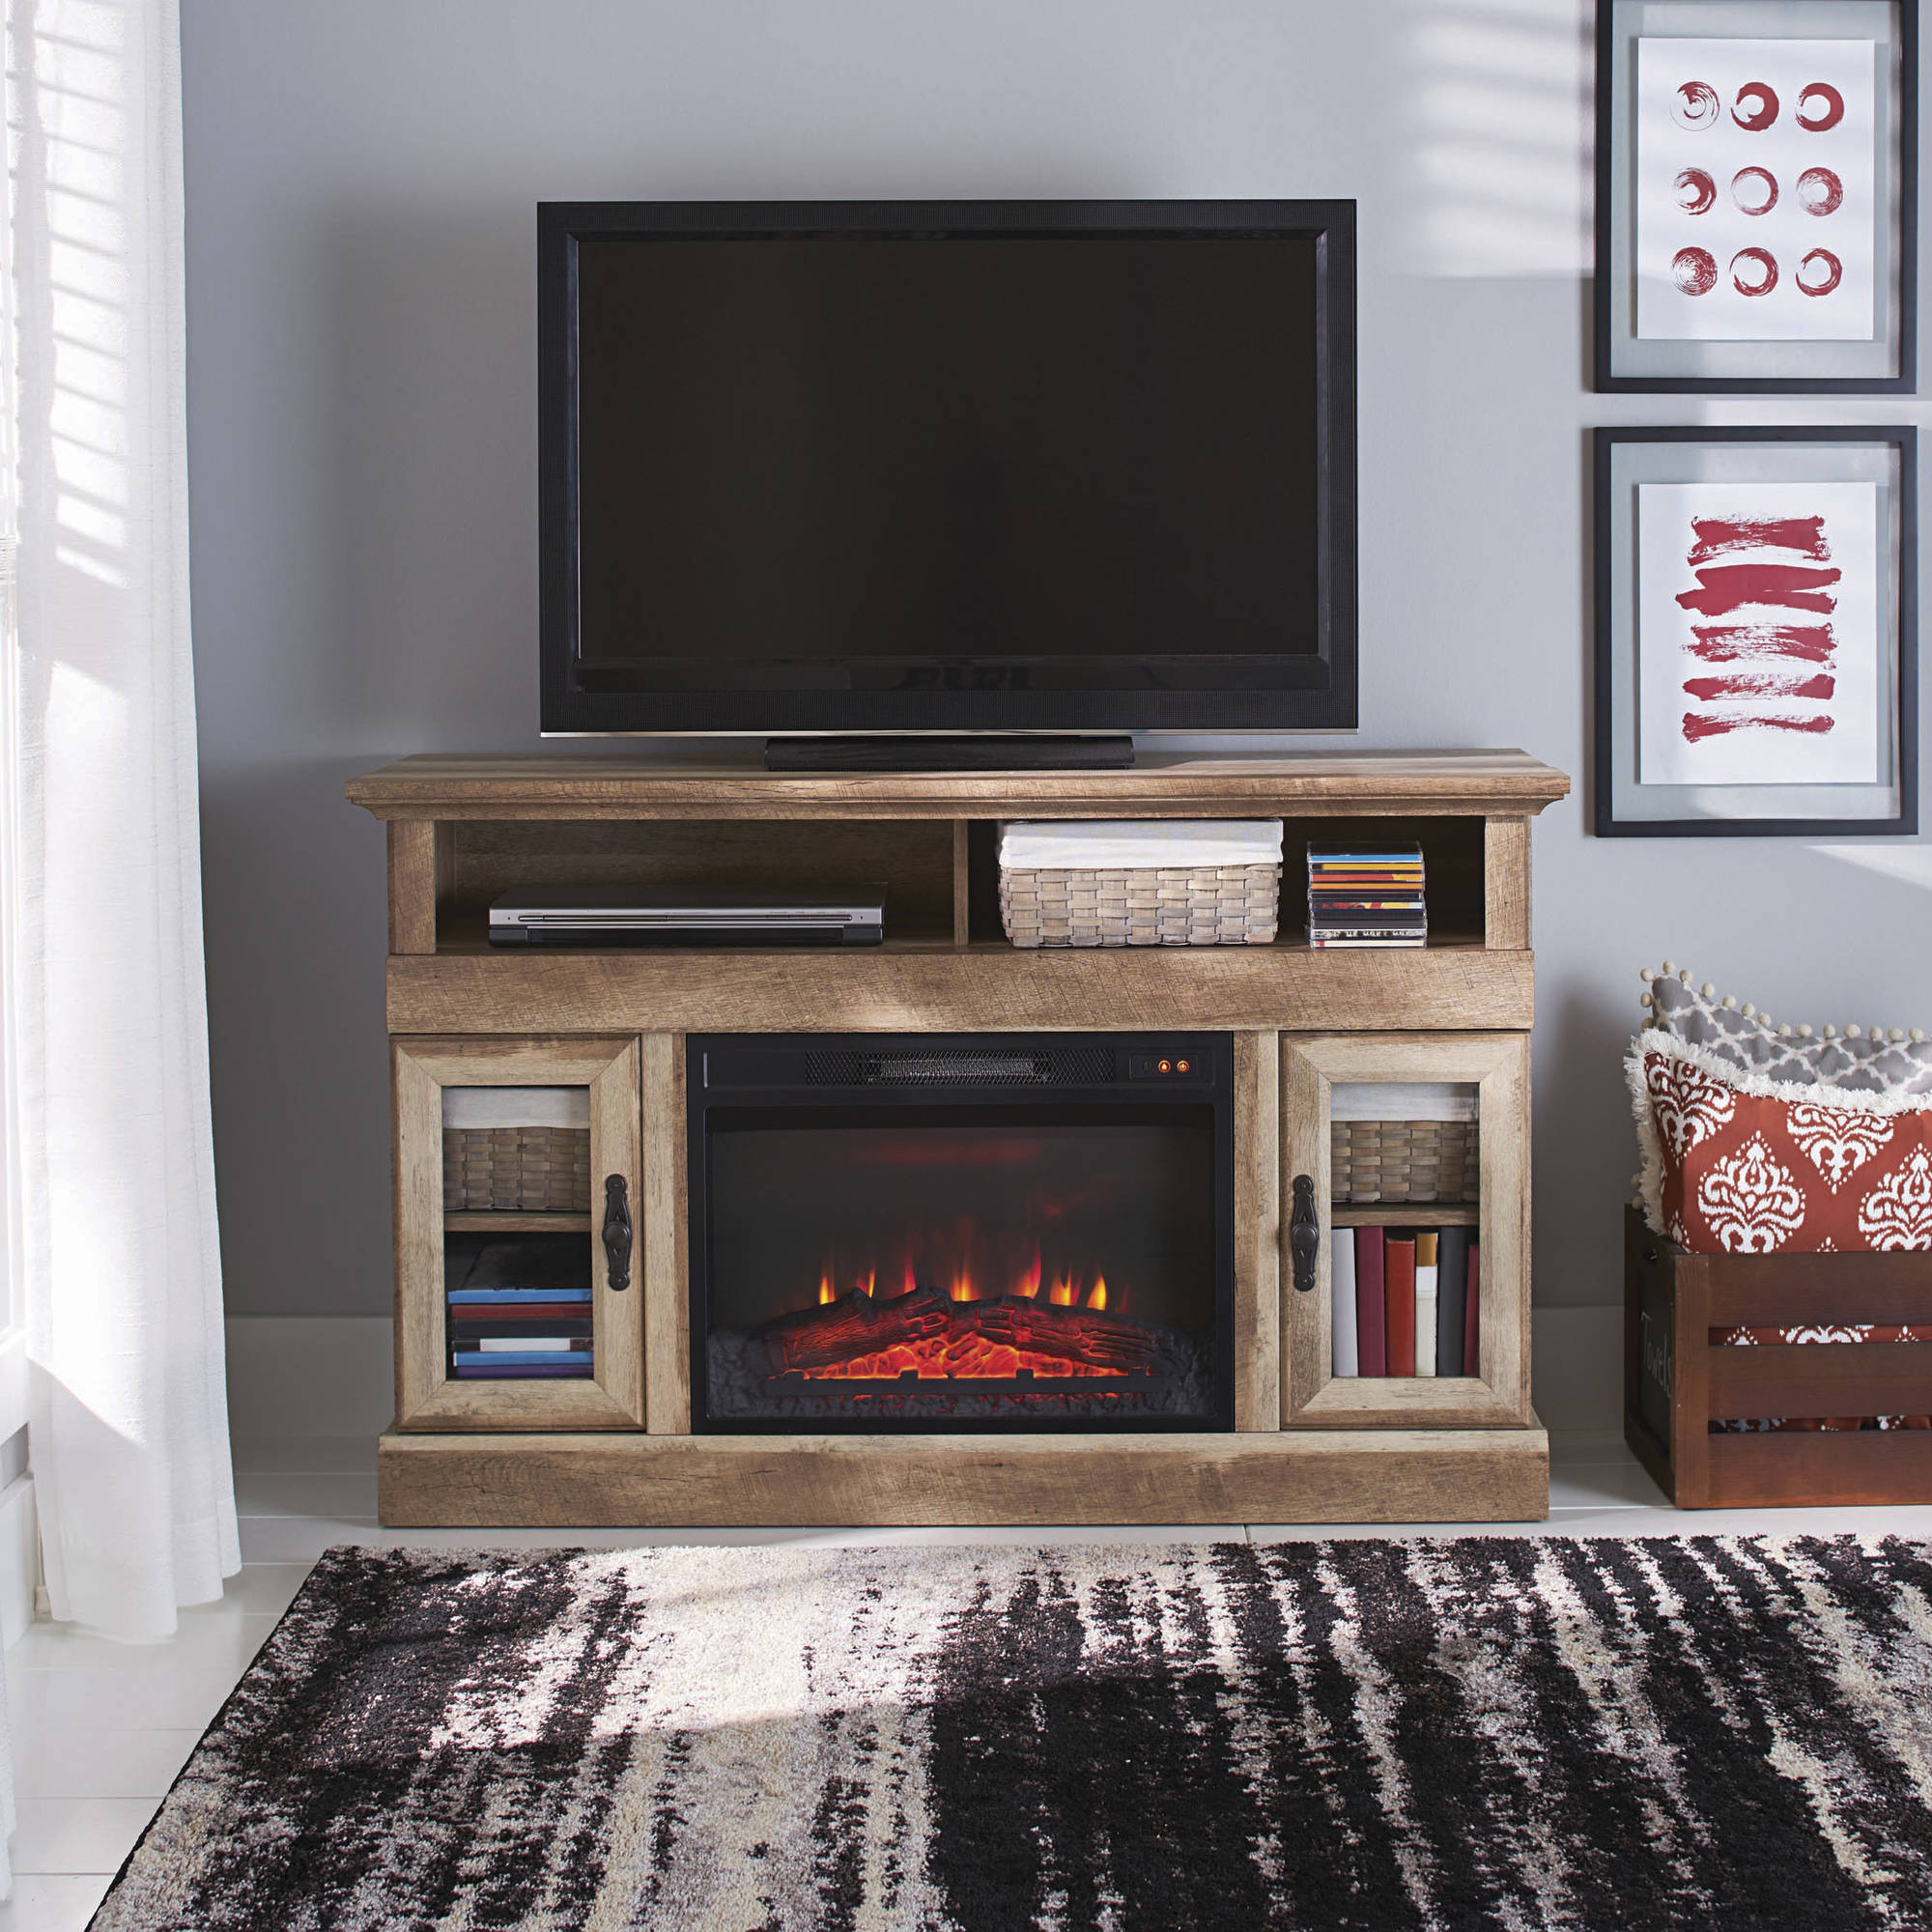 Portable Fireplace Tv Stand Elegant Whalen Media Fireplace Console for Tvs Up to 60" Brown ash